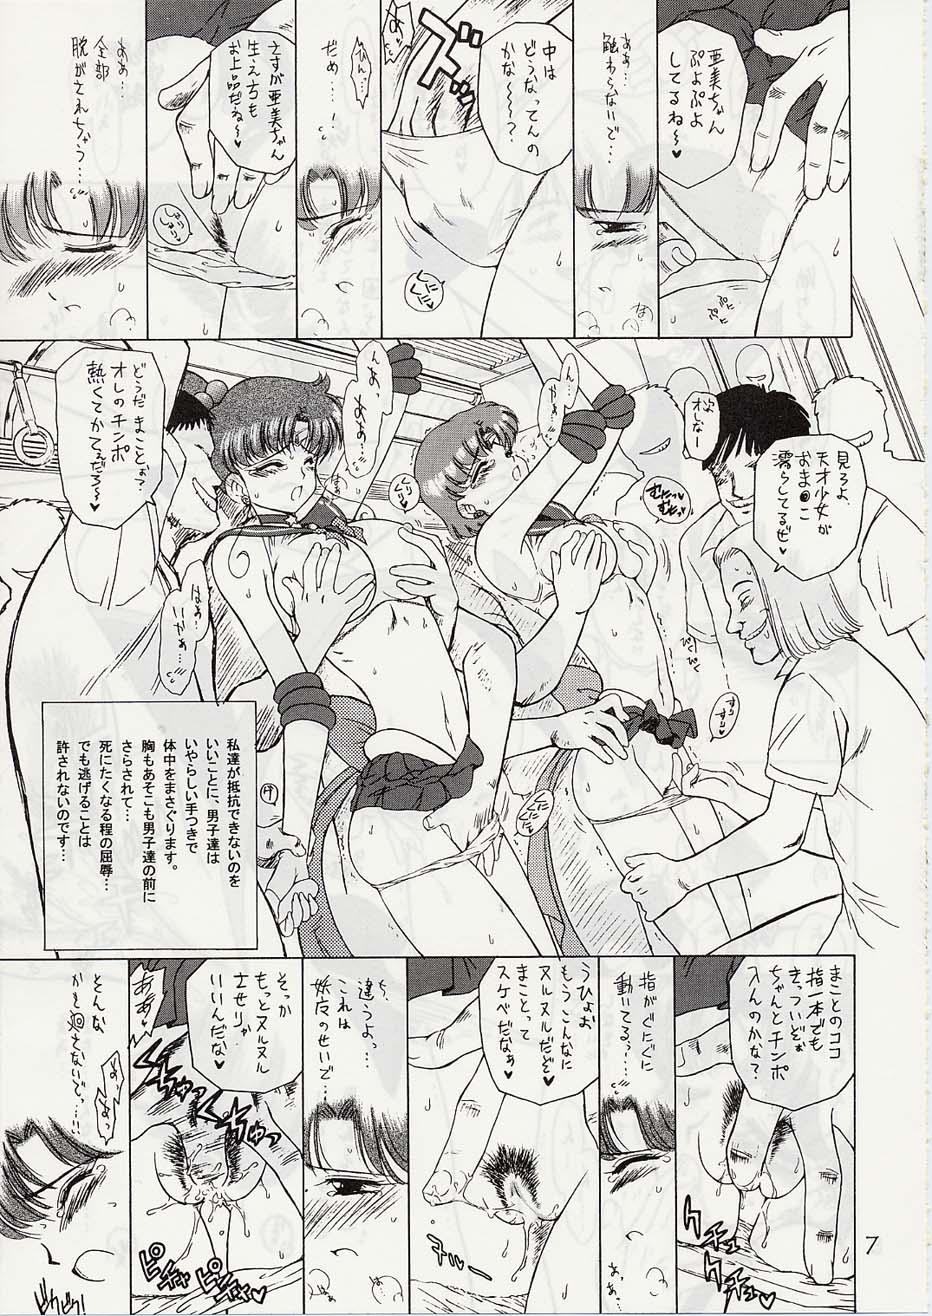 Leather Tohth - Sailor moon Foreskin - Page 6